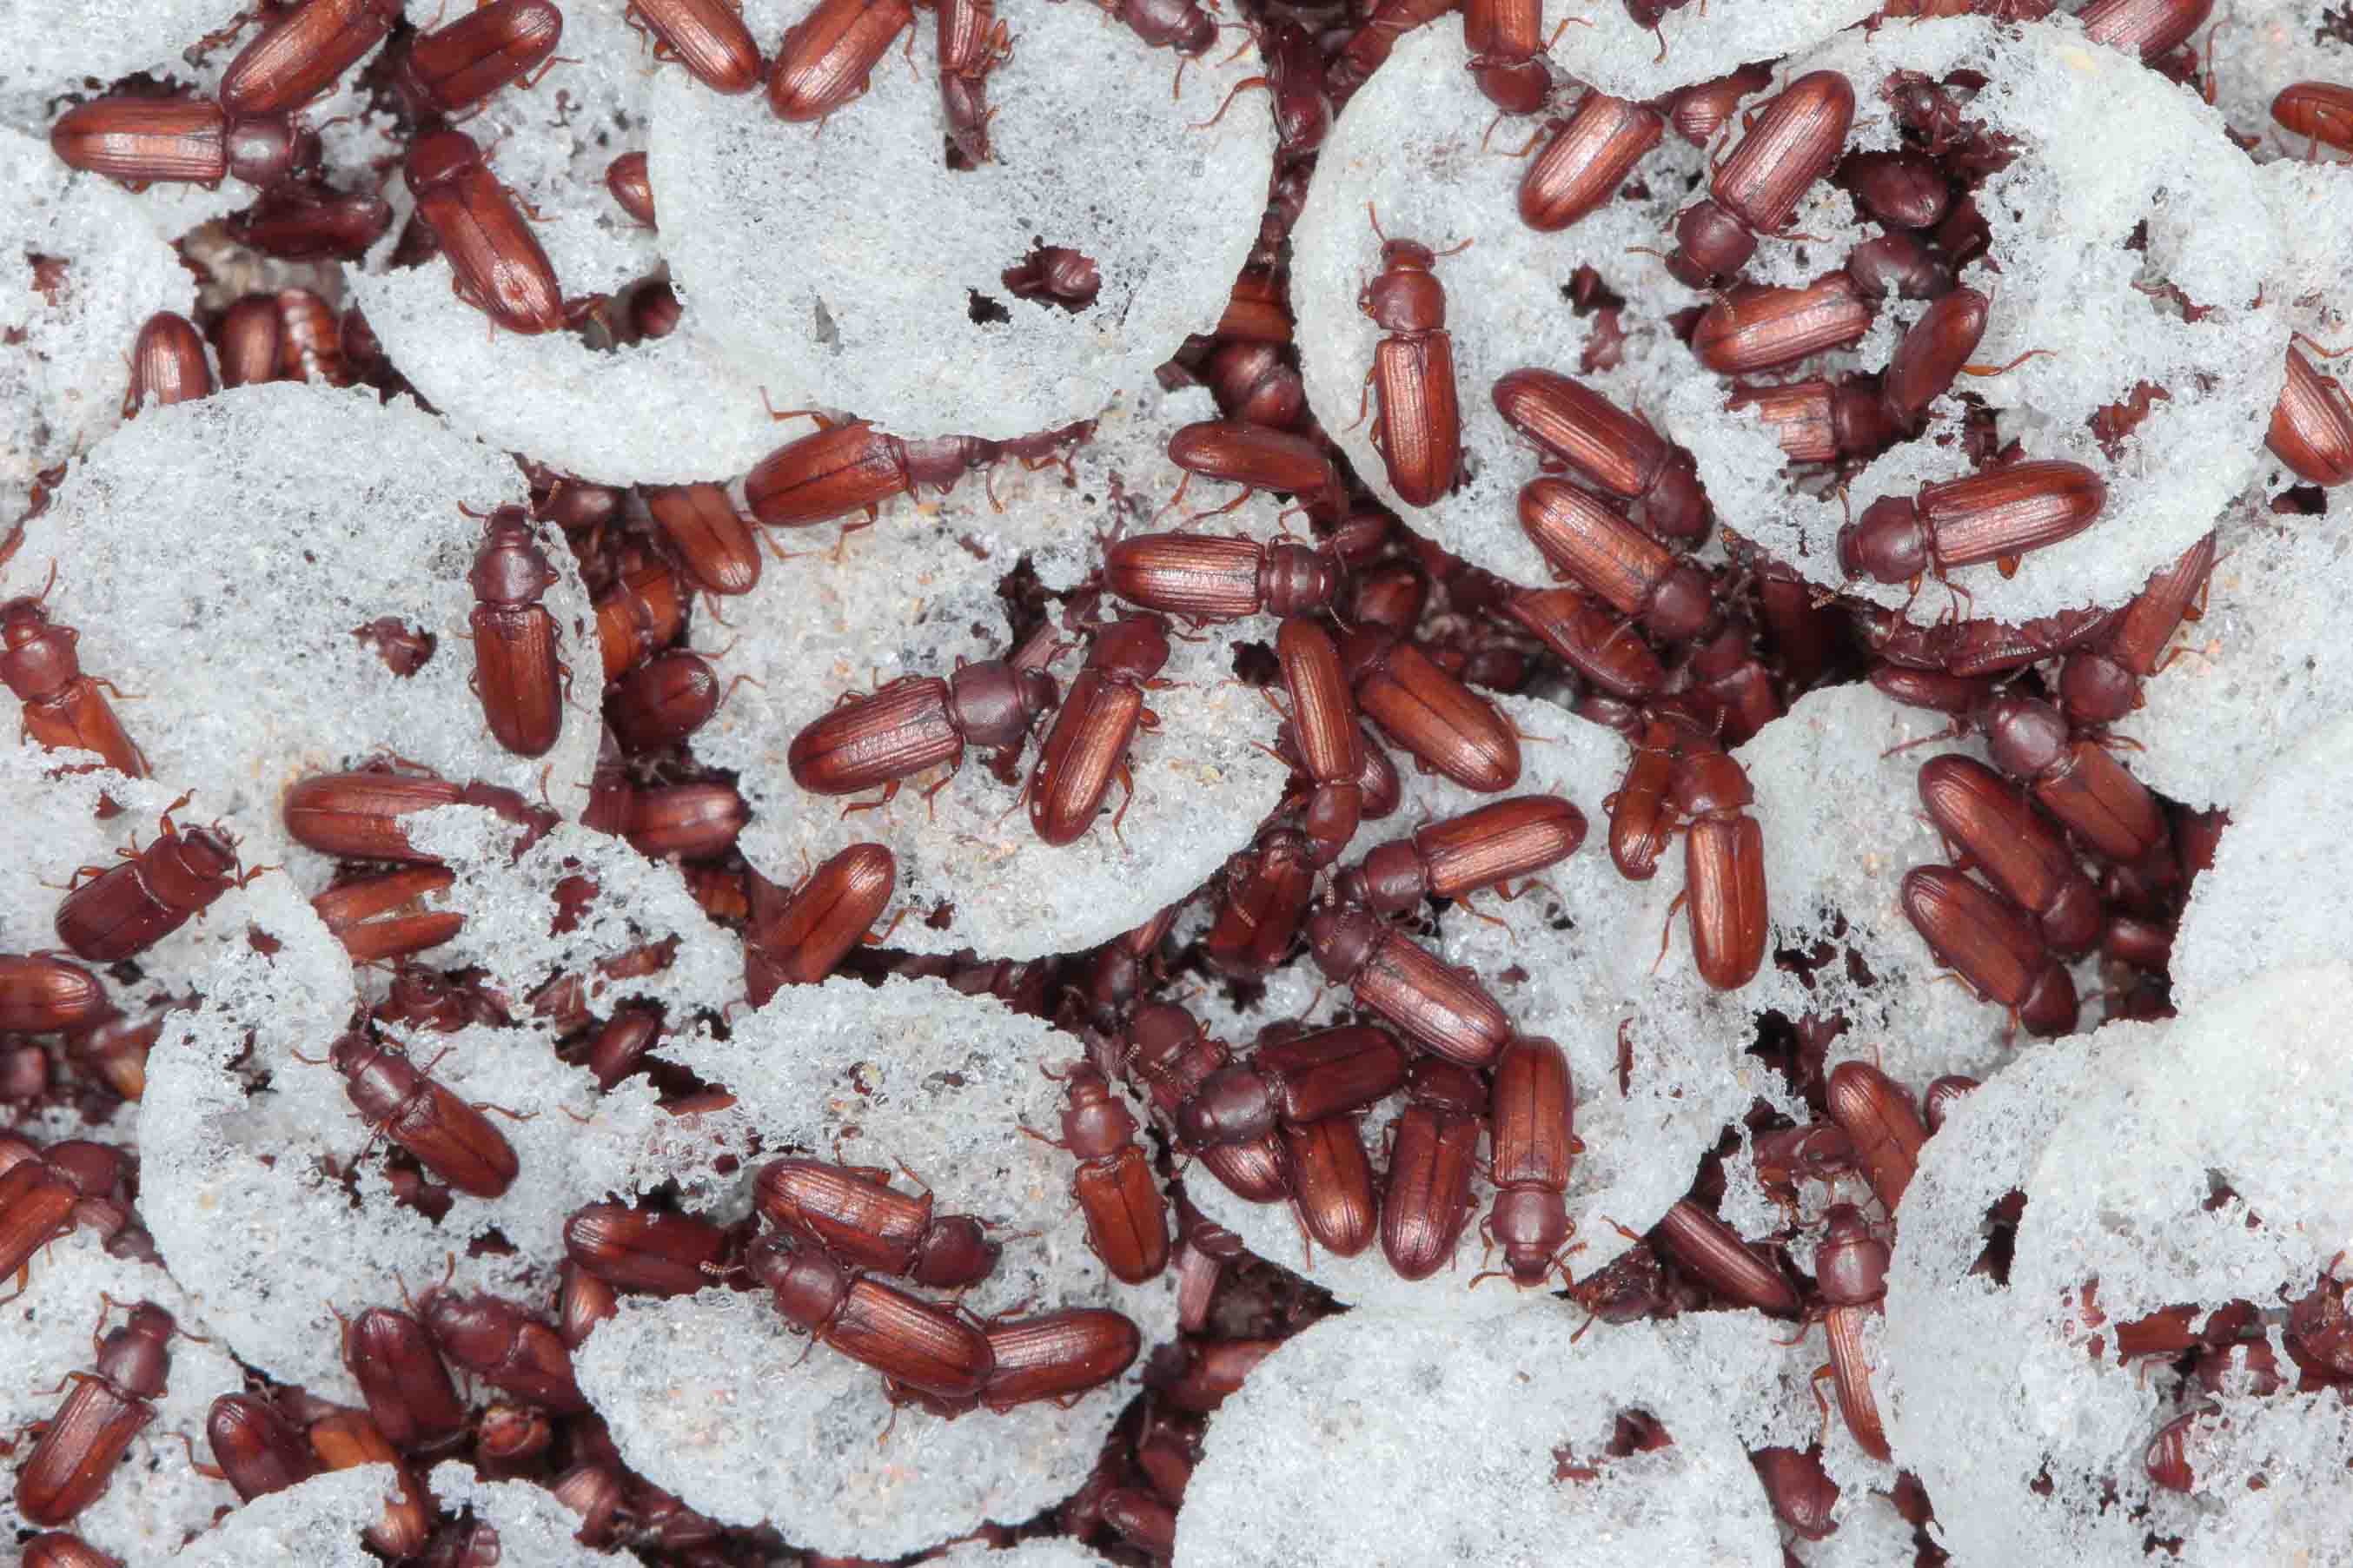 Buy grain insect control products to keep pests and rice insects at bay.